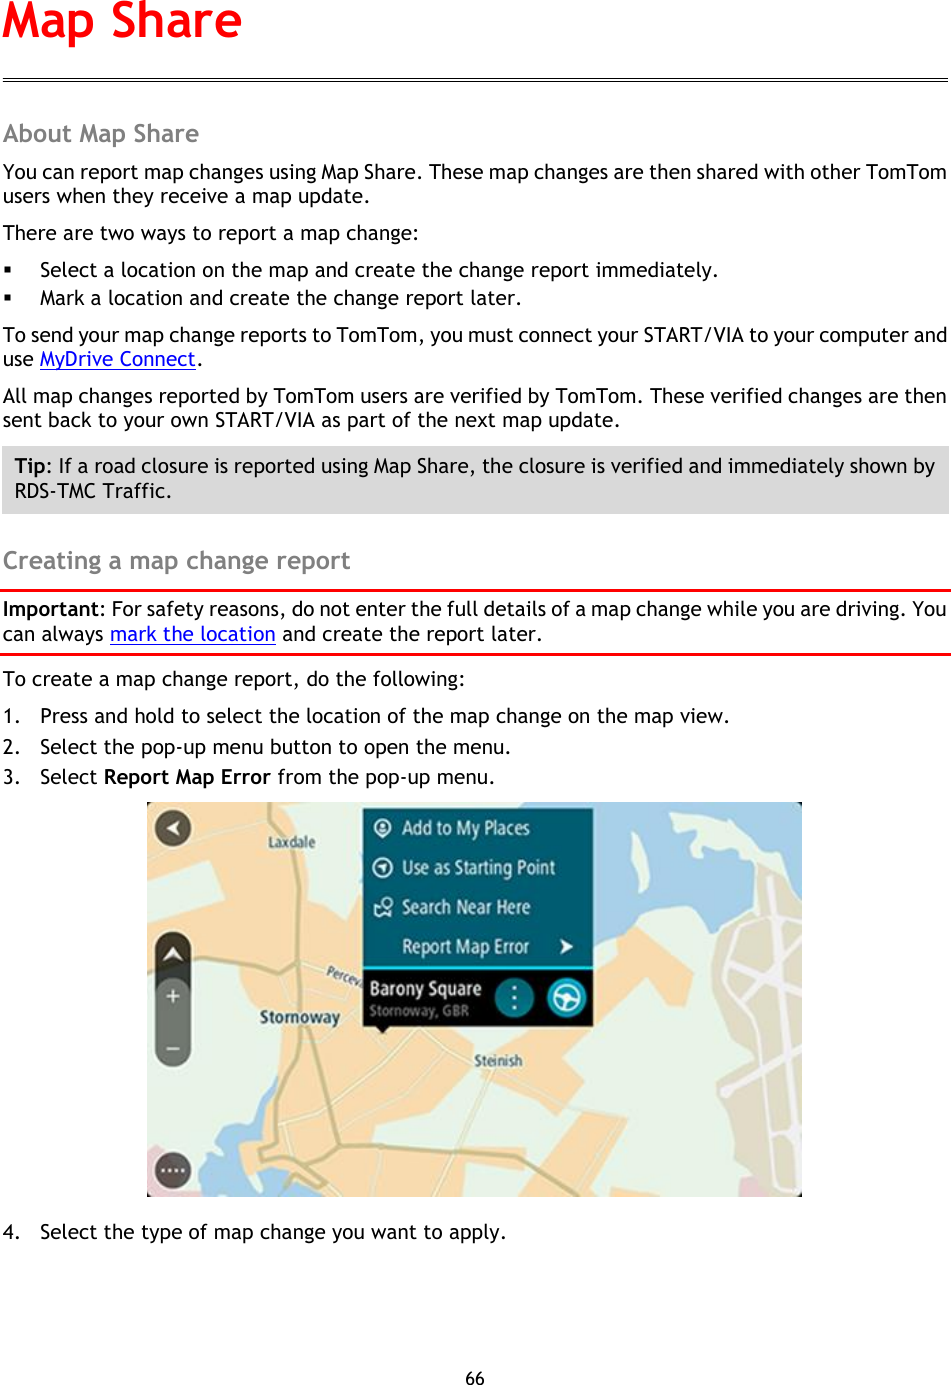 66    About Map Share You can report map changes using Map Share. These map changes are then shared with other TomTom users when they receive a map update. There are two ways to report a map change:  Select a location on the map and create the change report immediately.  Mark a location and create the change report later. To send your map change reports to TomTom, you must connect your START/VIA to your computer and use MyDrive Connect. All map changes reported by TomTom users are verified by TomTom. These verified changes are then sent back to your own START/VIA as part of the next map update. Tip: If a road closure is reported using Map Share, the closure is verified and immediately shown by RDS-TMC Traffic.  Creating a map change report Important: For safety reasons, do not enter the full details of a map change while you are driving. You can always mark the location and create the report later. To create a map change report, do the following: 1. Press and hold to select the location of the map change on the map view. 2. Select the pop-up menu button to open the menu. 3. Select Report Map Error from the pop-up menu.  4. Select the type of map change you want to apply. Map Share 